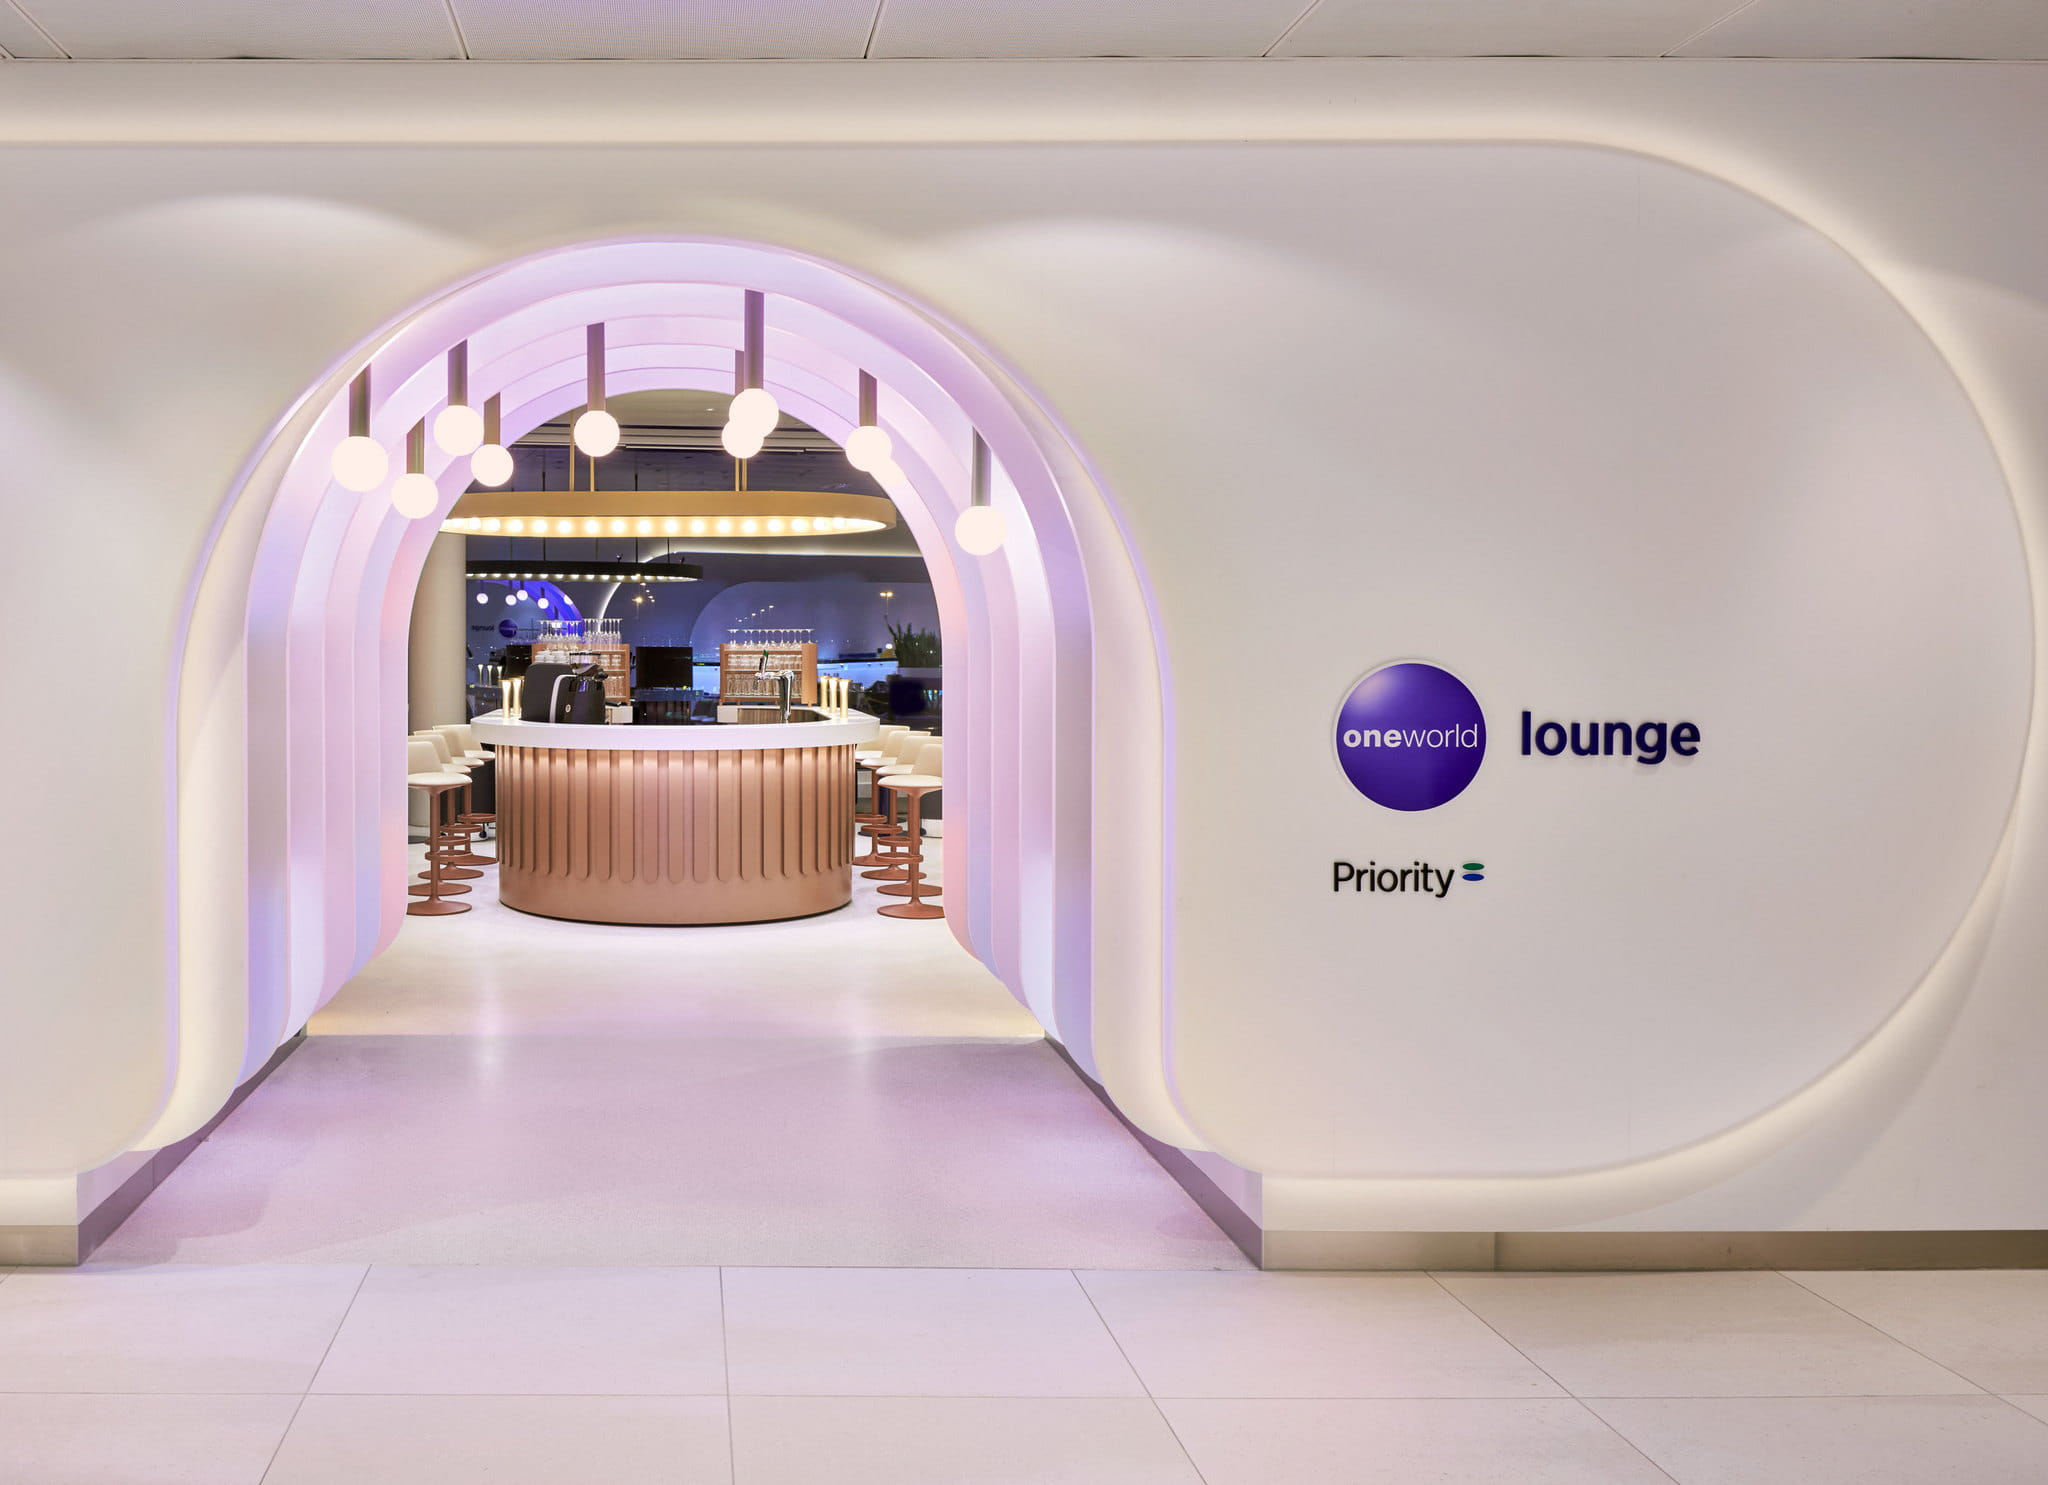 entrance to the oneworld lounge in Amsterdam.